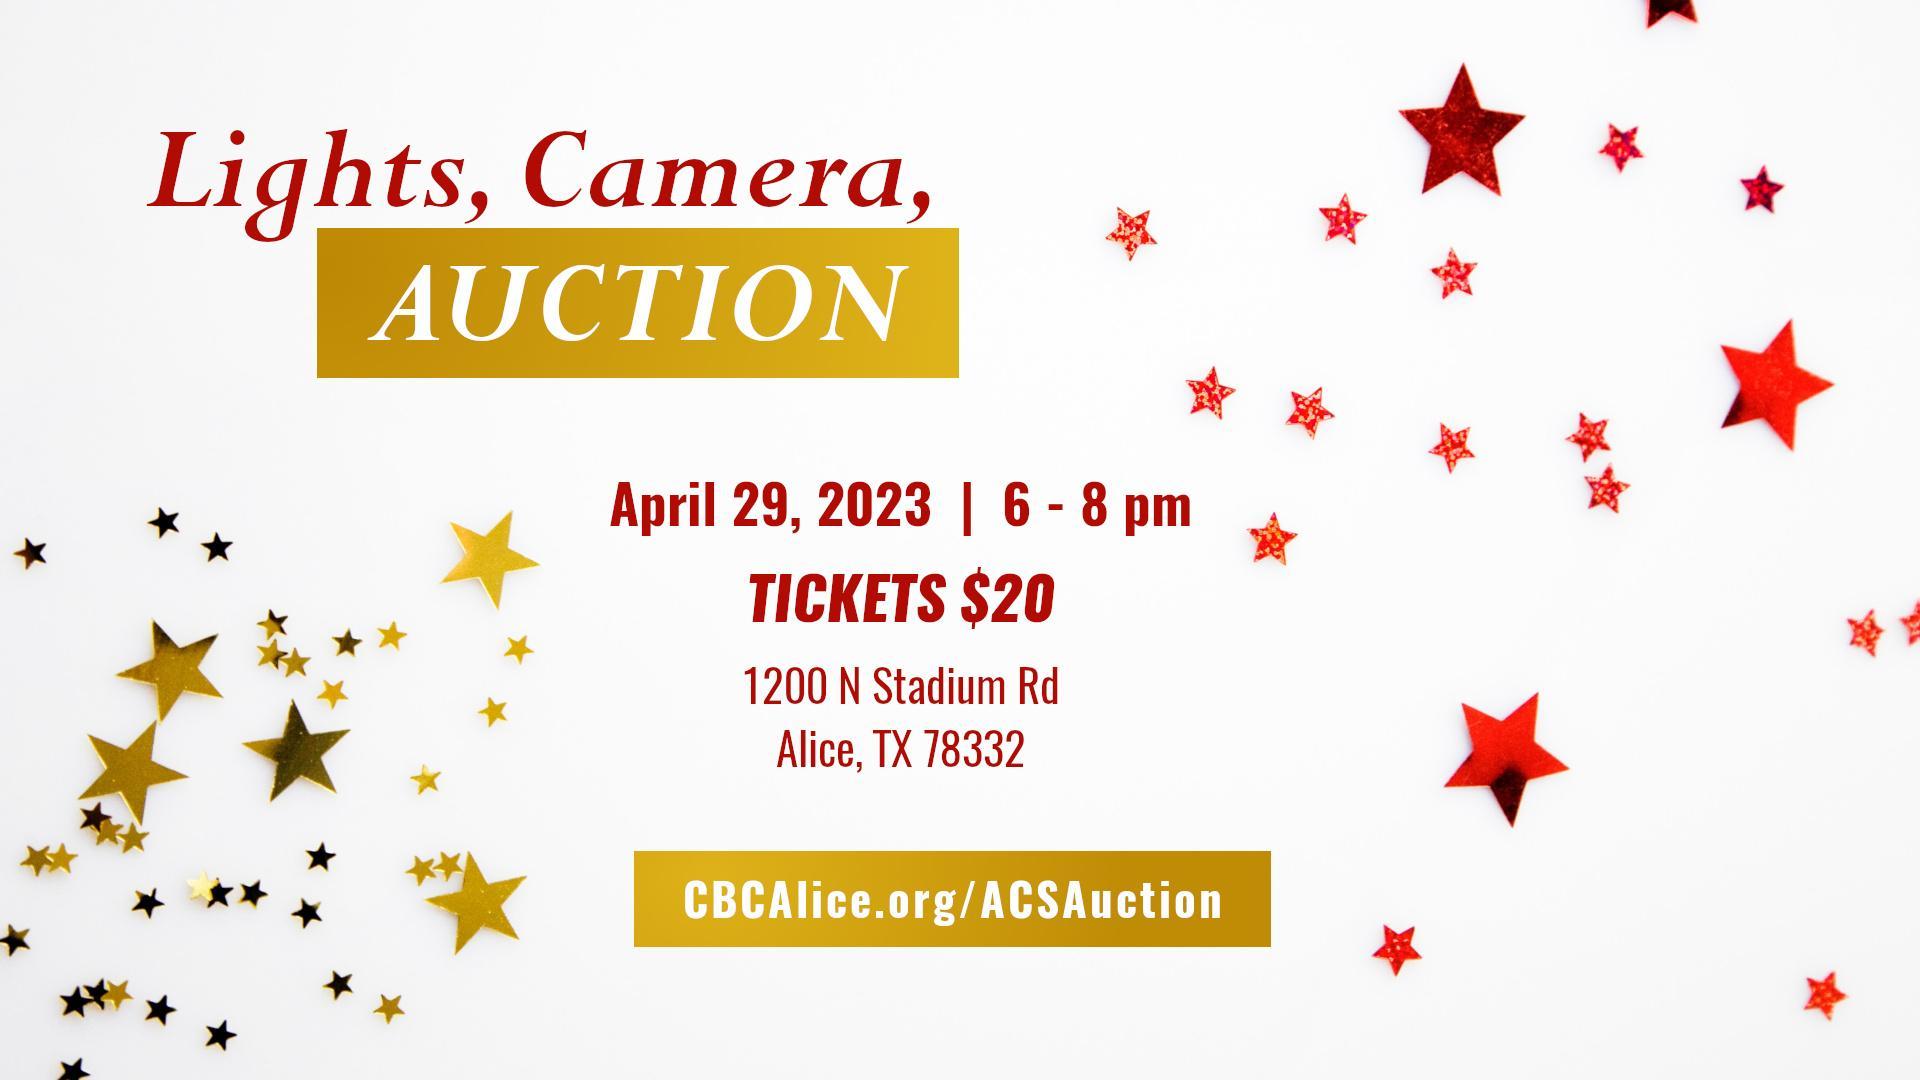 Star decorations and text promoting the Alice Christian School silent auction on April 29, 2023